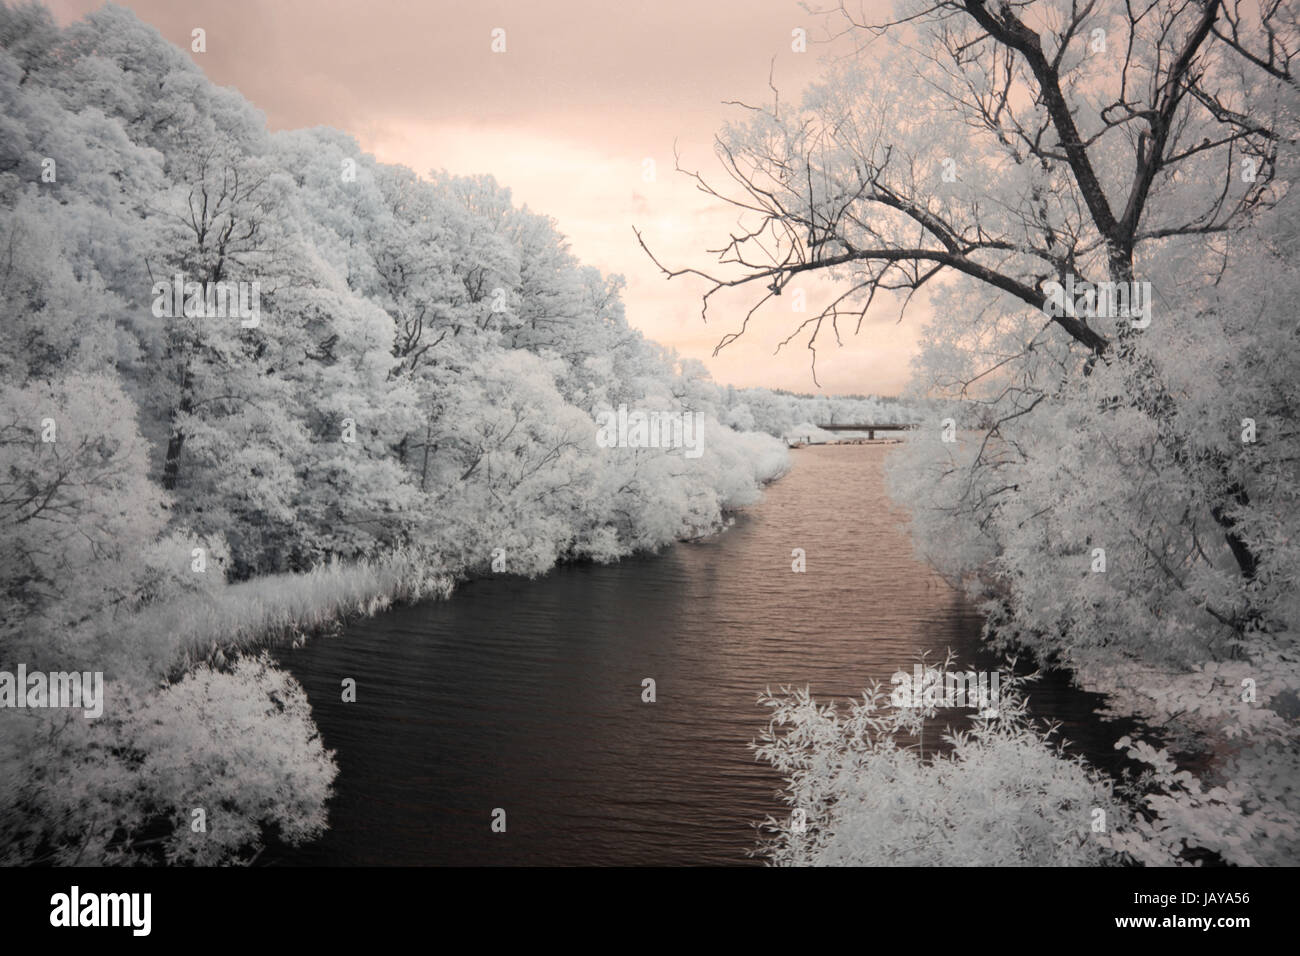 A picture taken from a rail road bridge IR filter Stock Photo